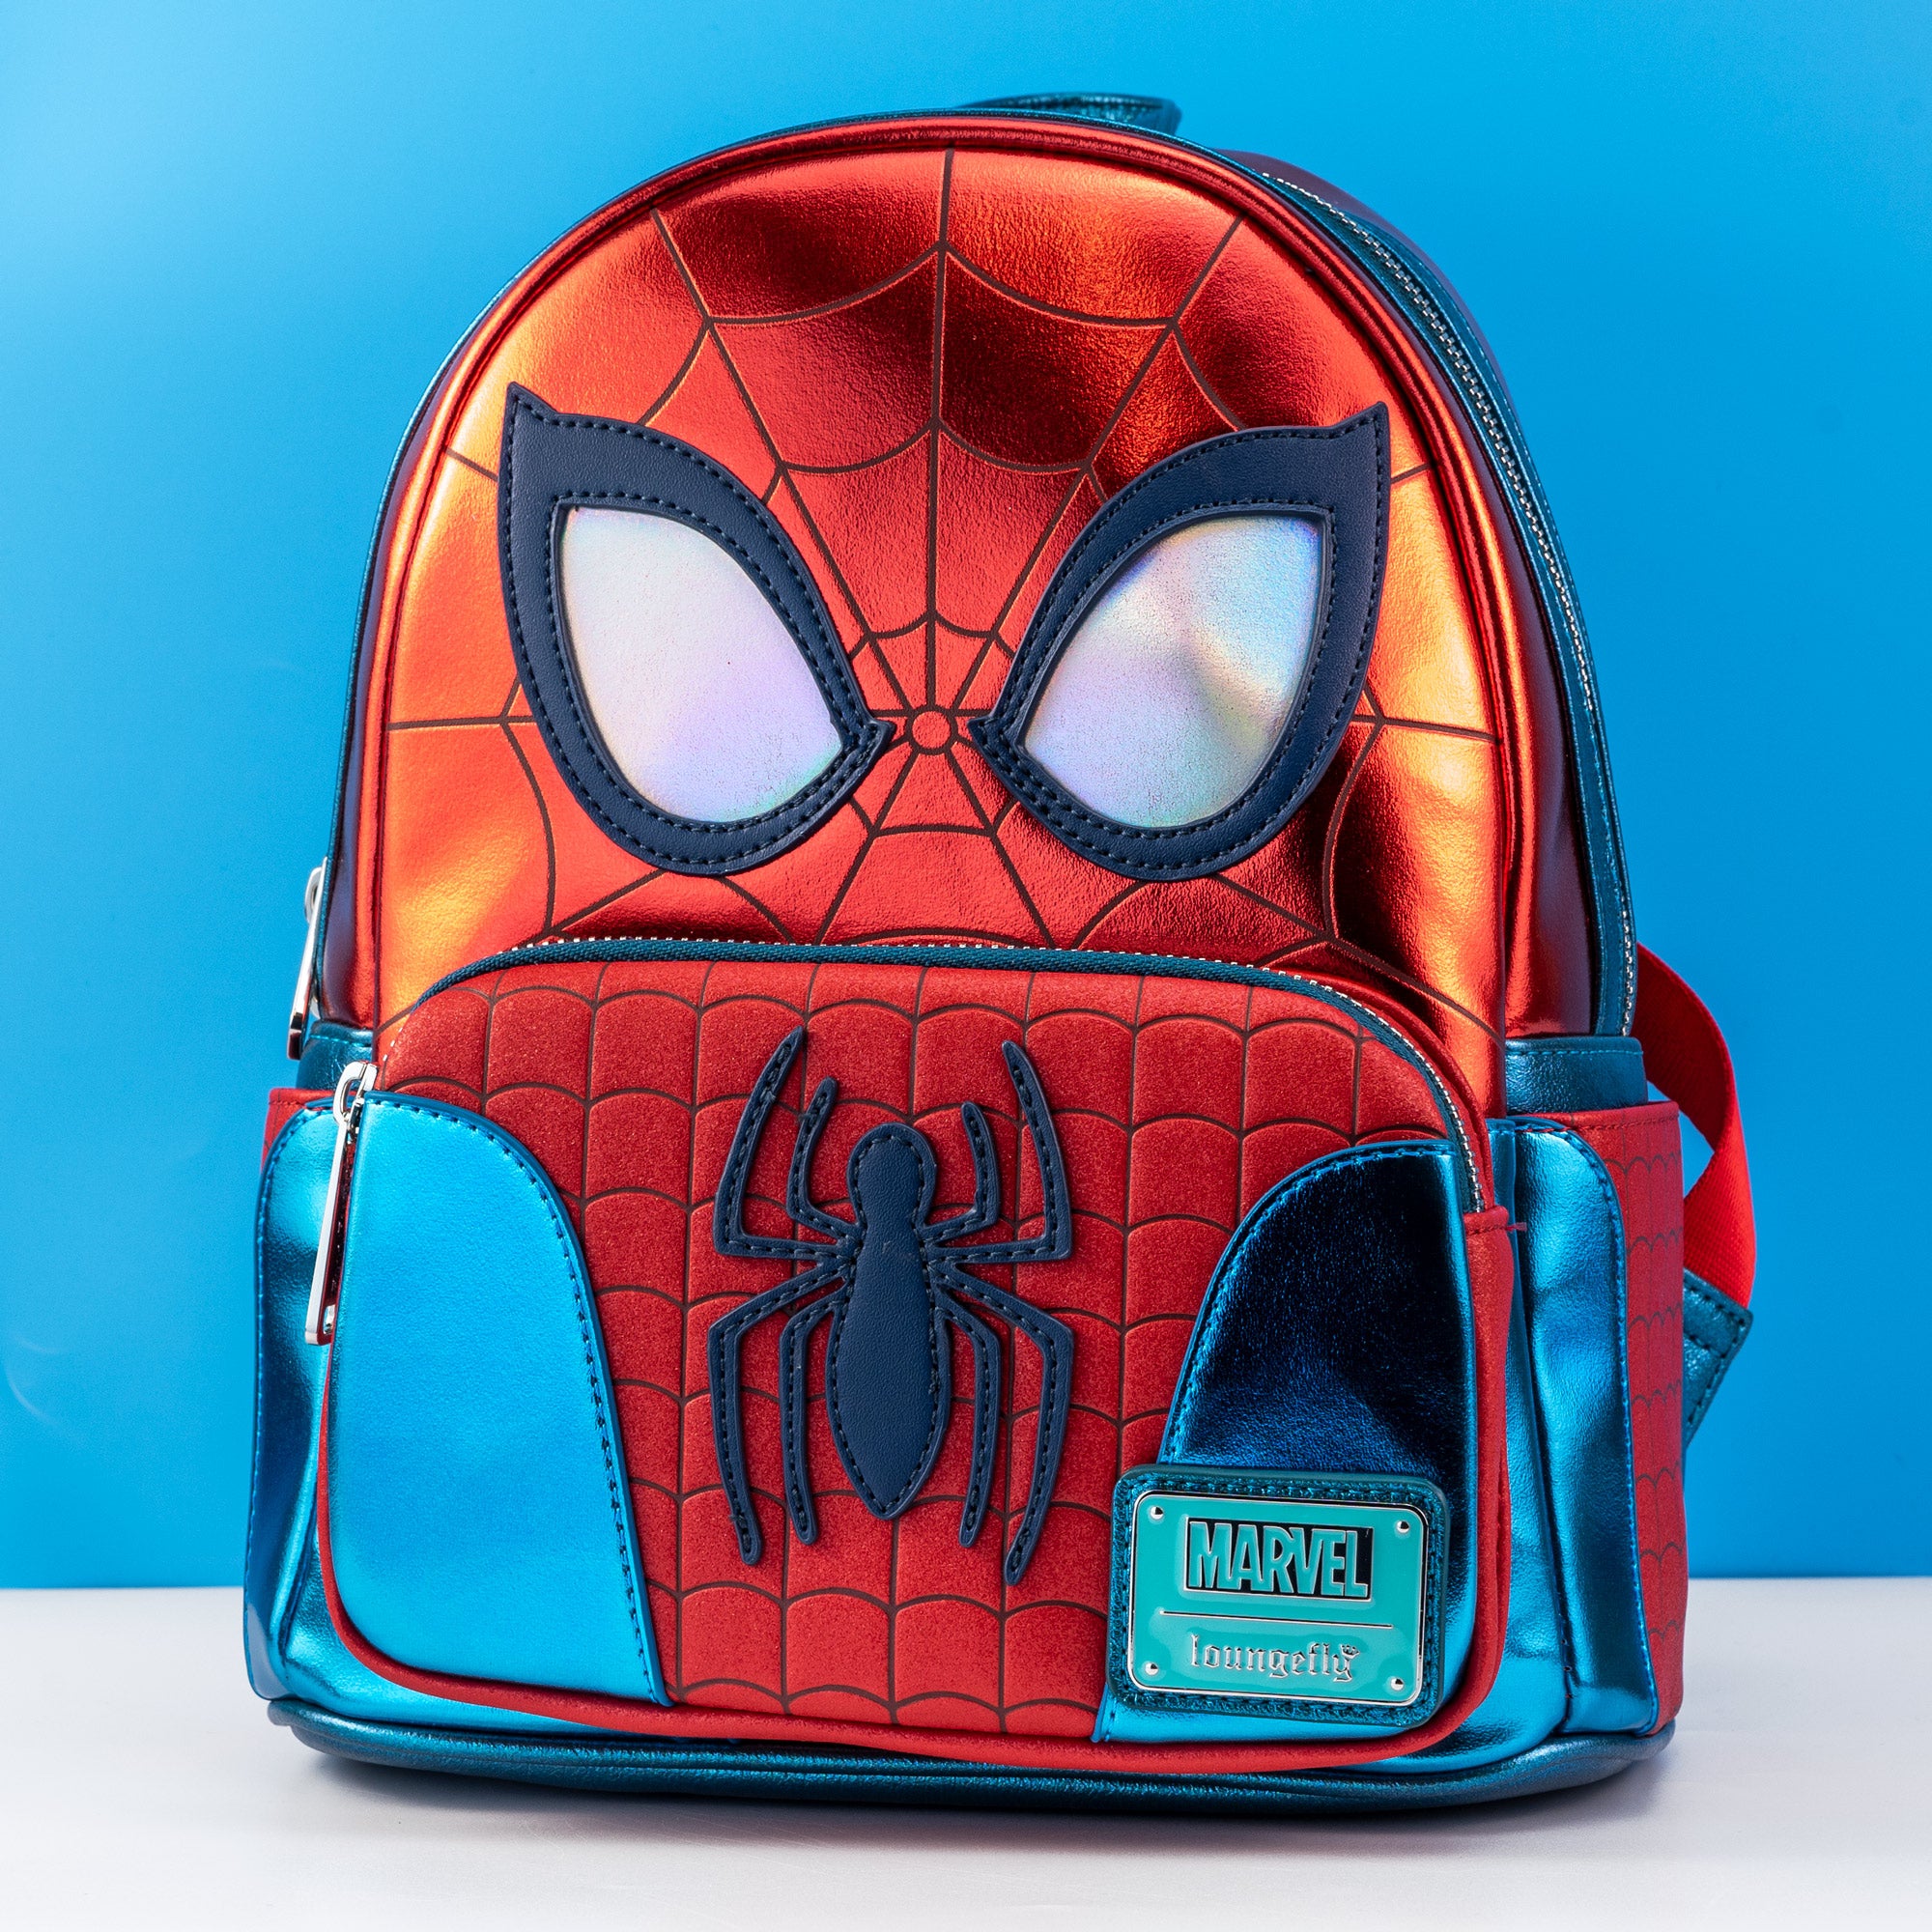 Loungefly x Marvel Spider-Man Shine Cosplay Mini Backpack